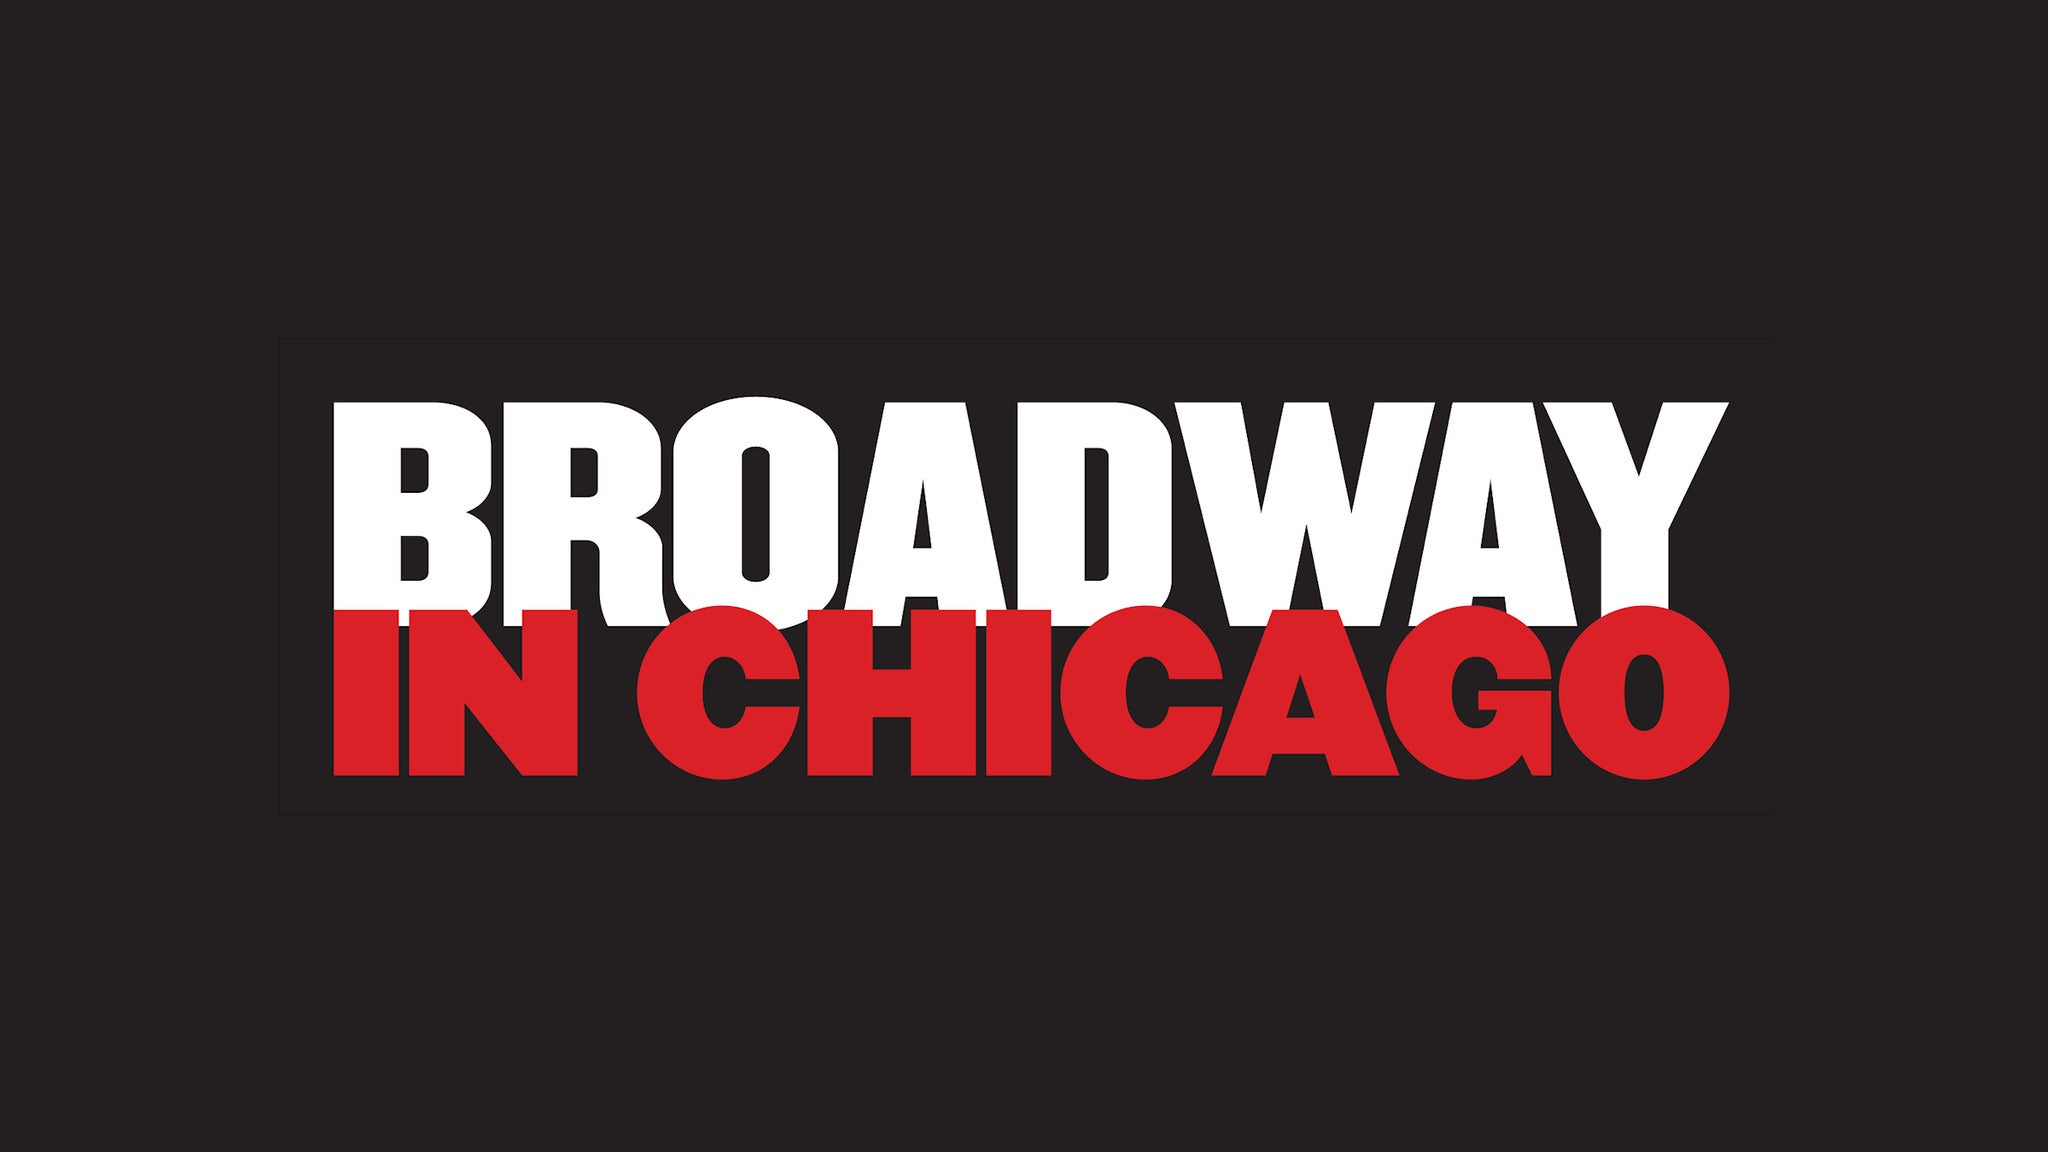 SIX (Chicago) in Chicago promo photo for Online presale offer code